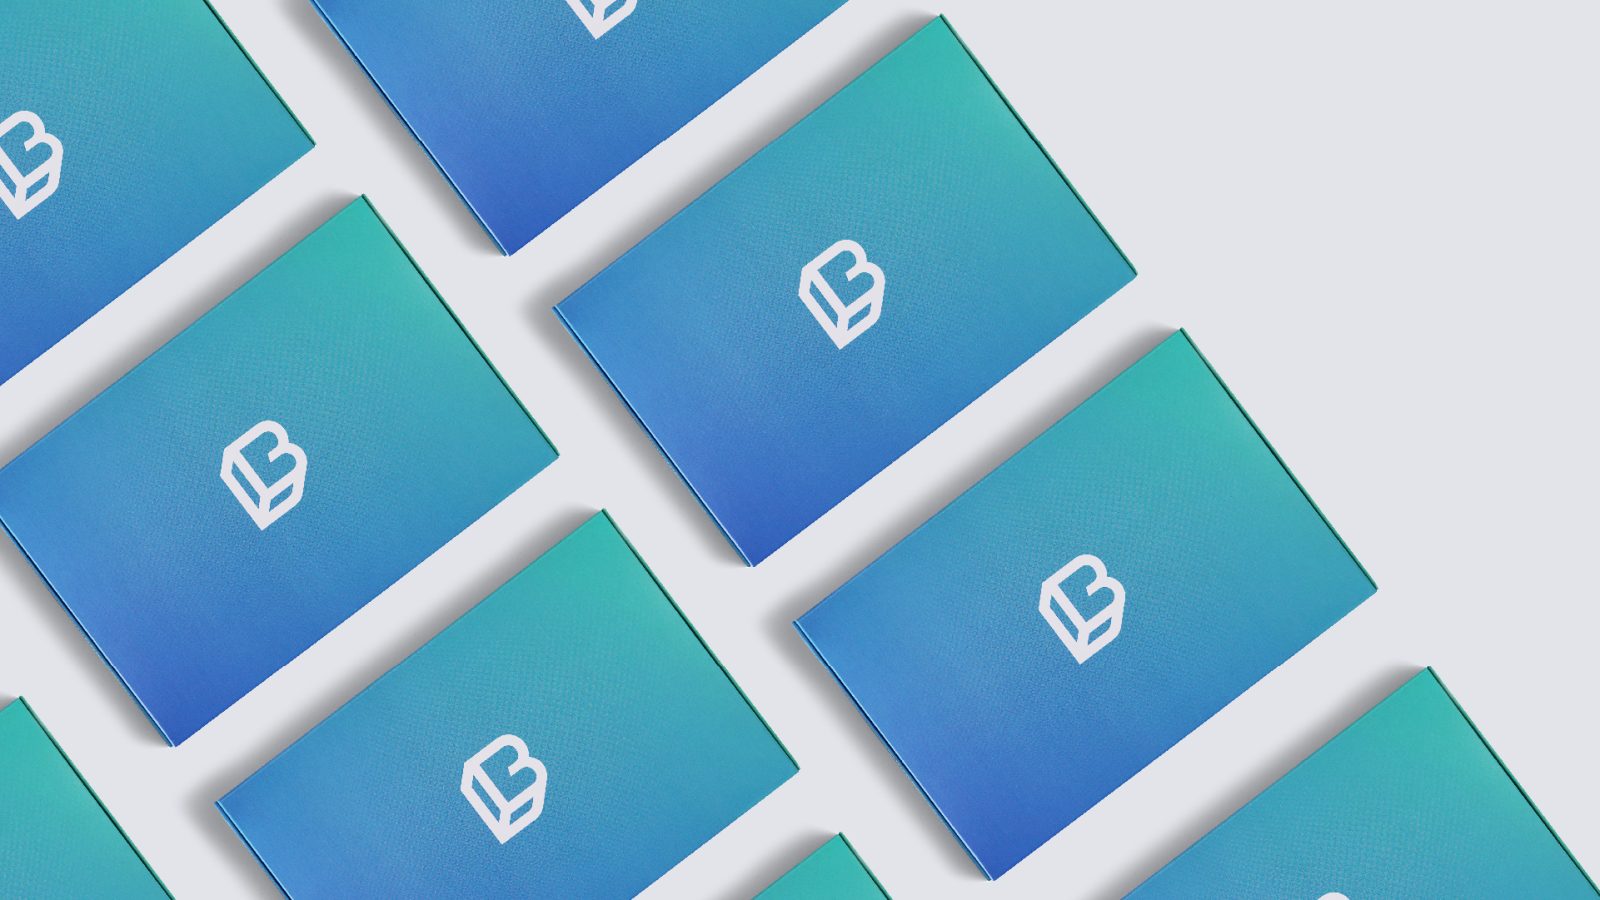 Multiple business cards in teal and blue featuring a white letter 